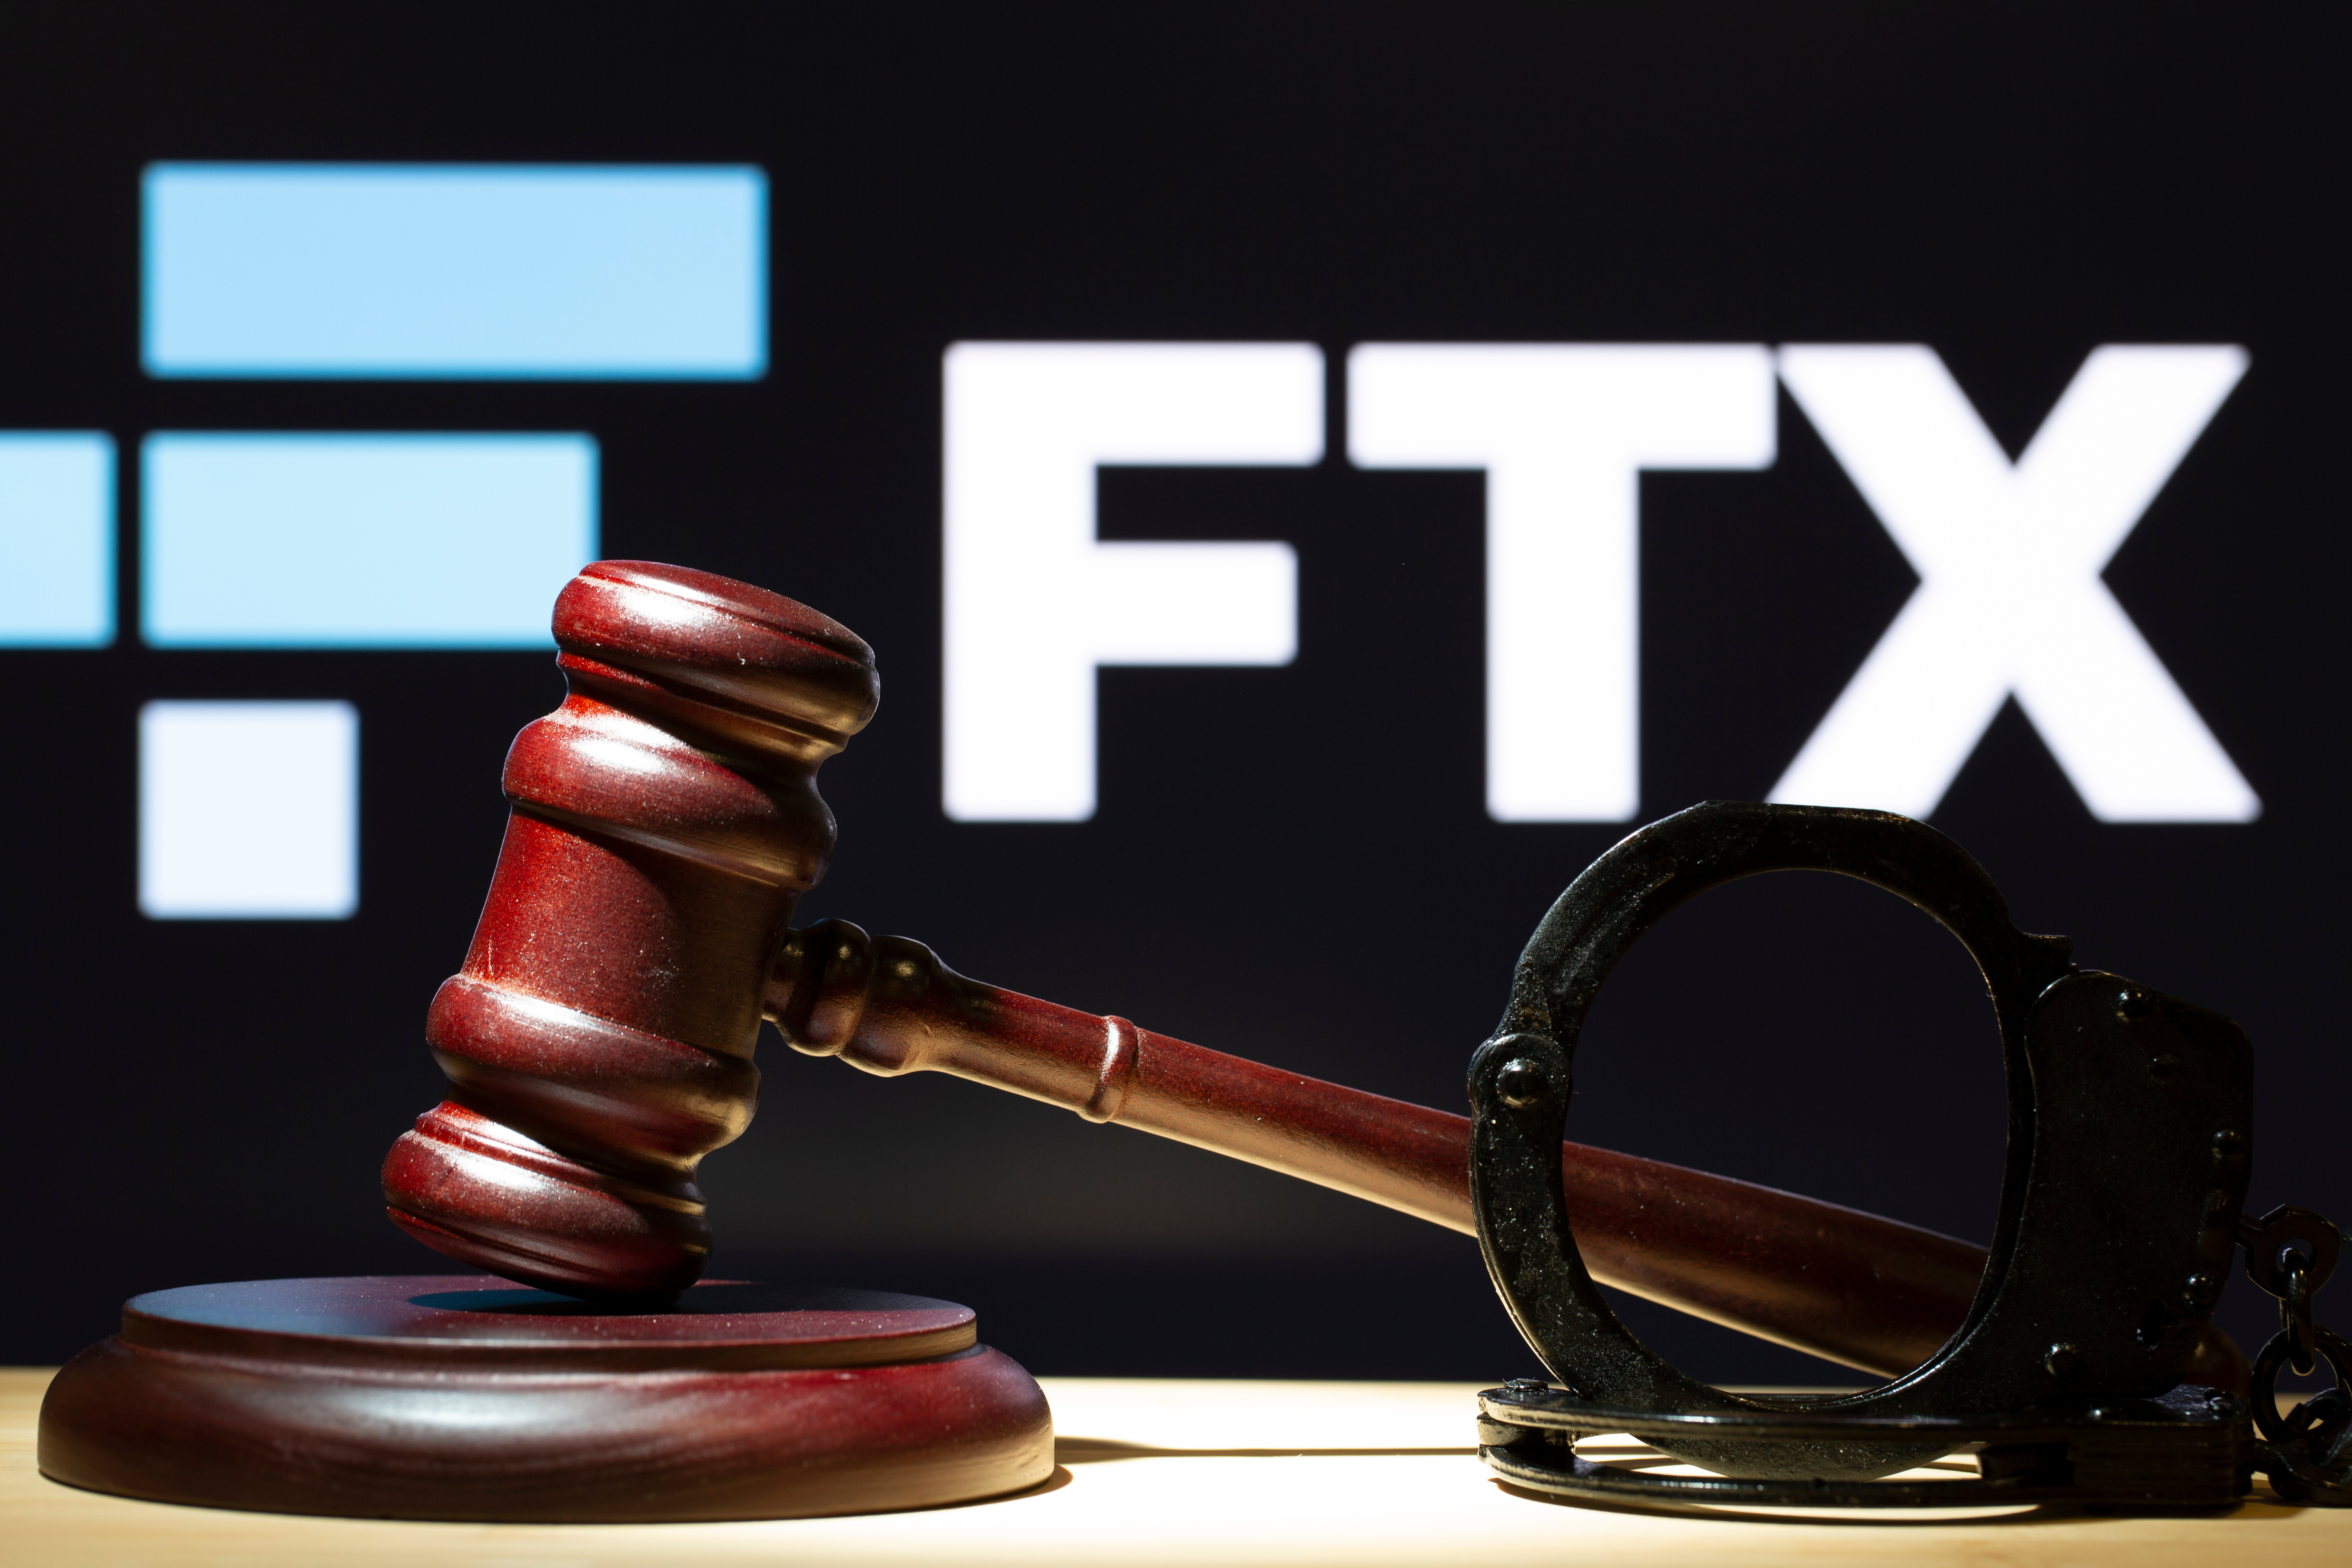 The FTX trial testimony highlights issues